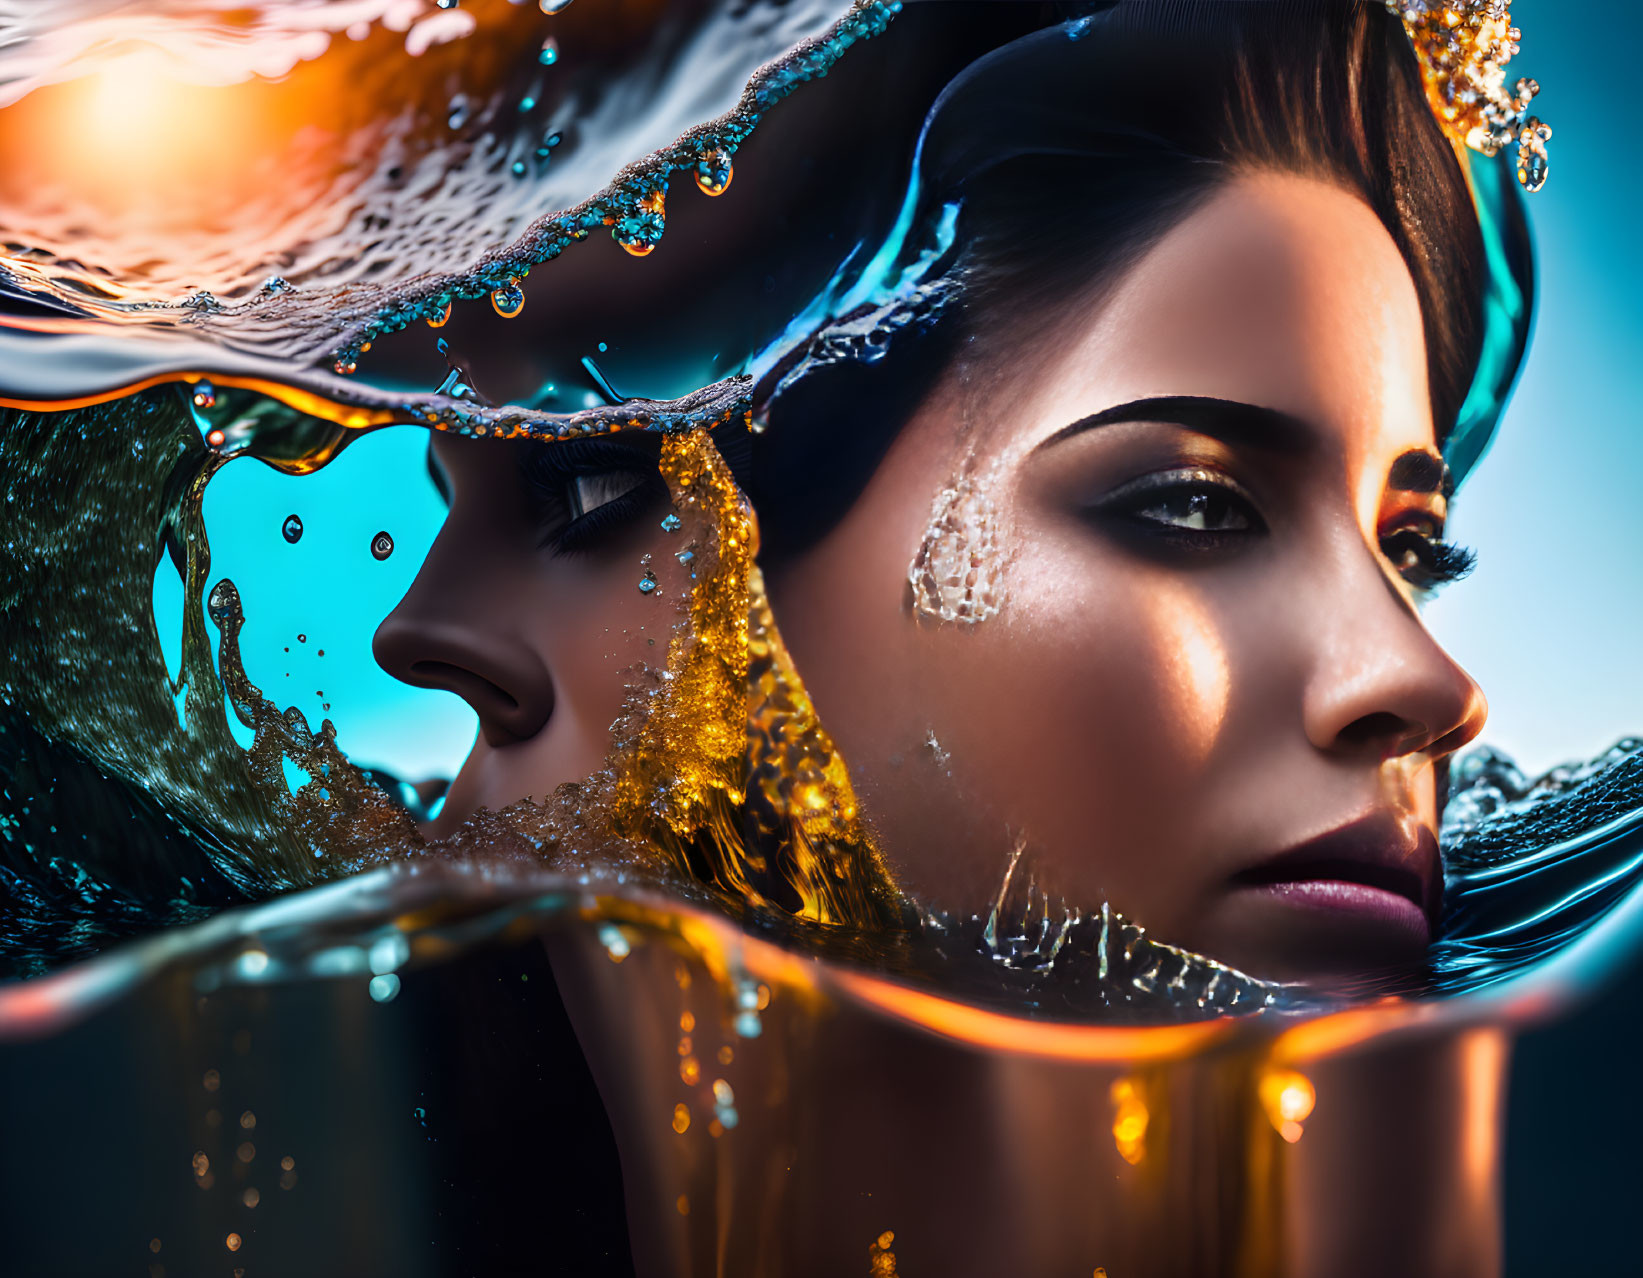 Woman's Face Emerges from Glistening Water with Gold Accents